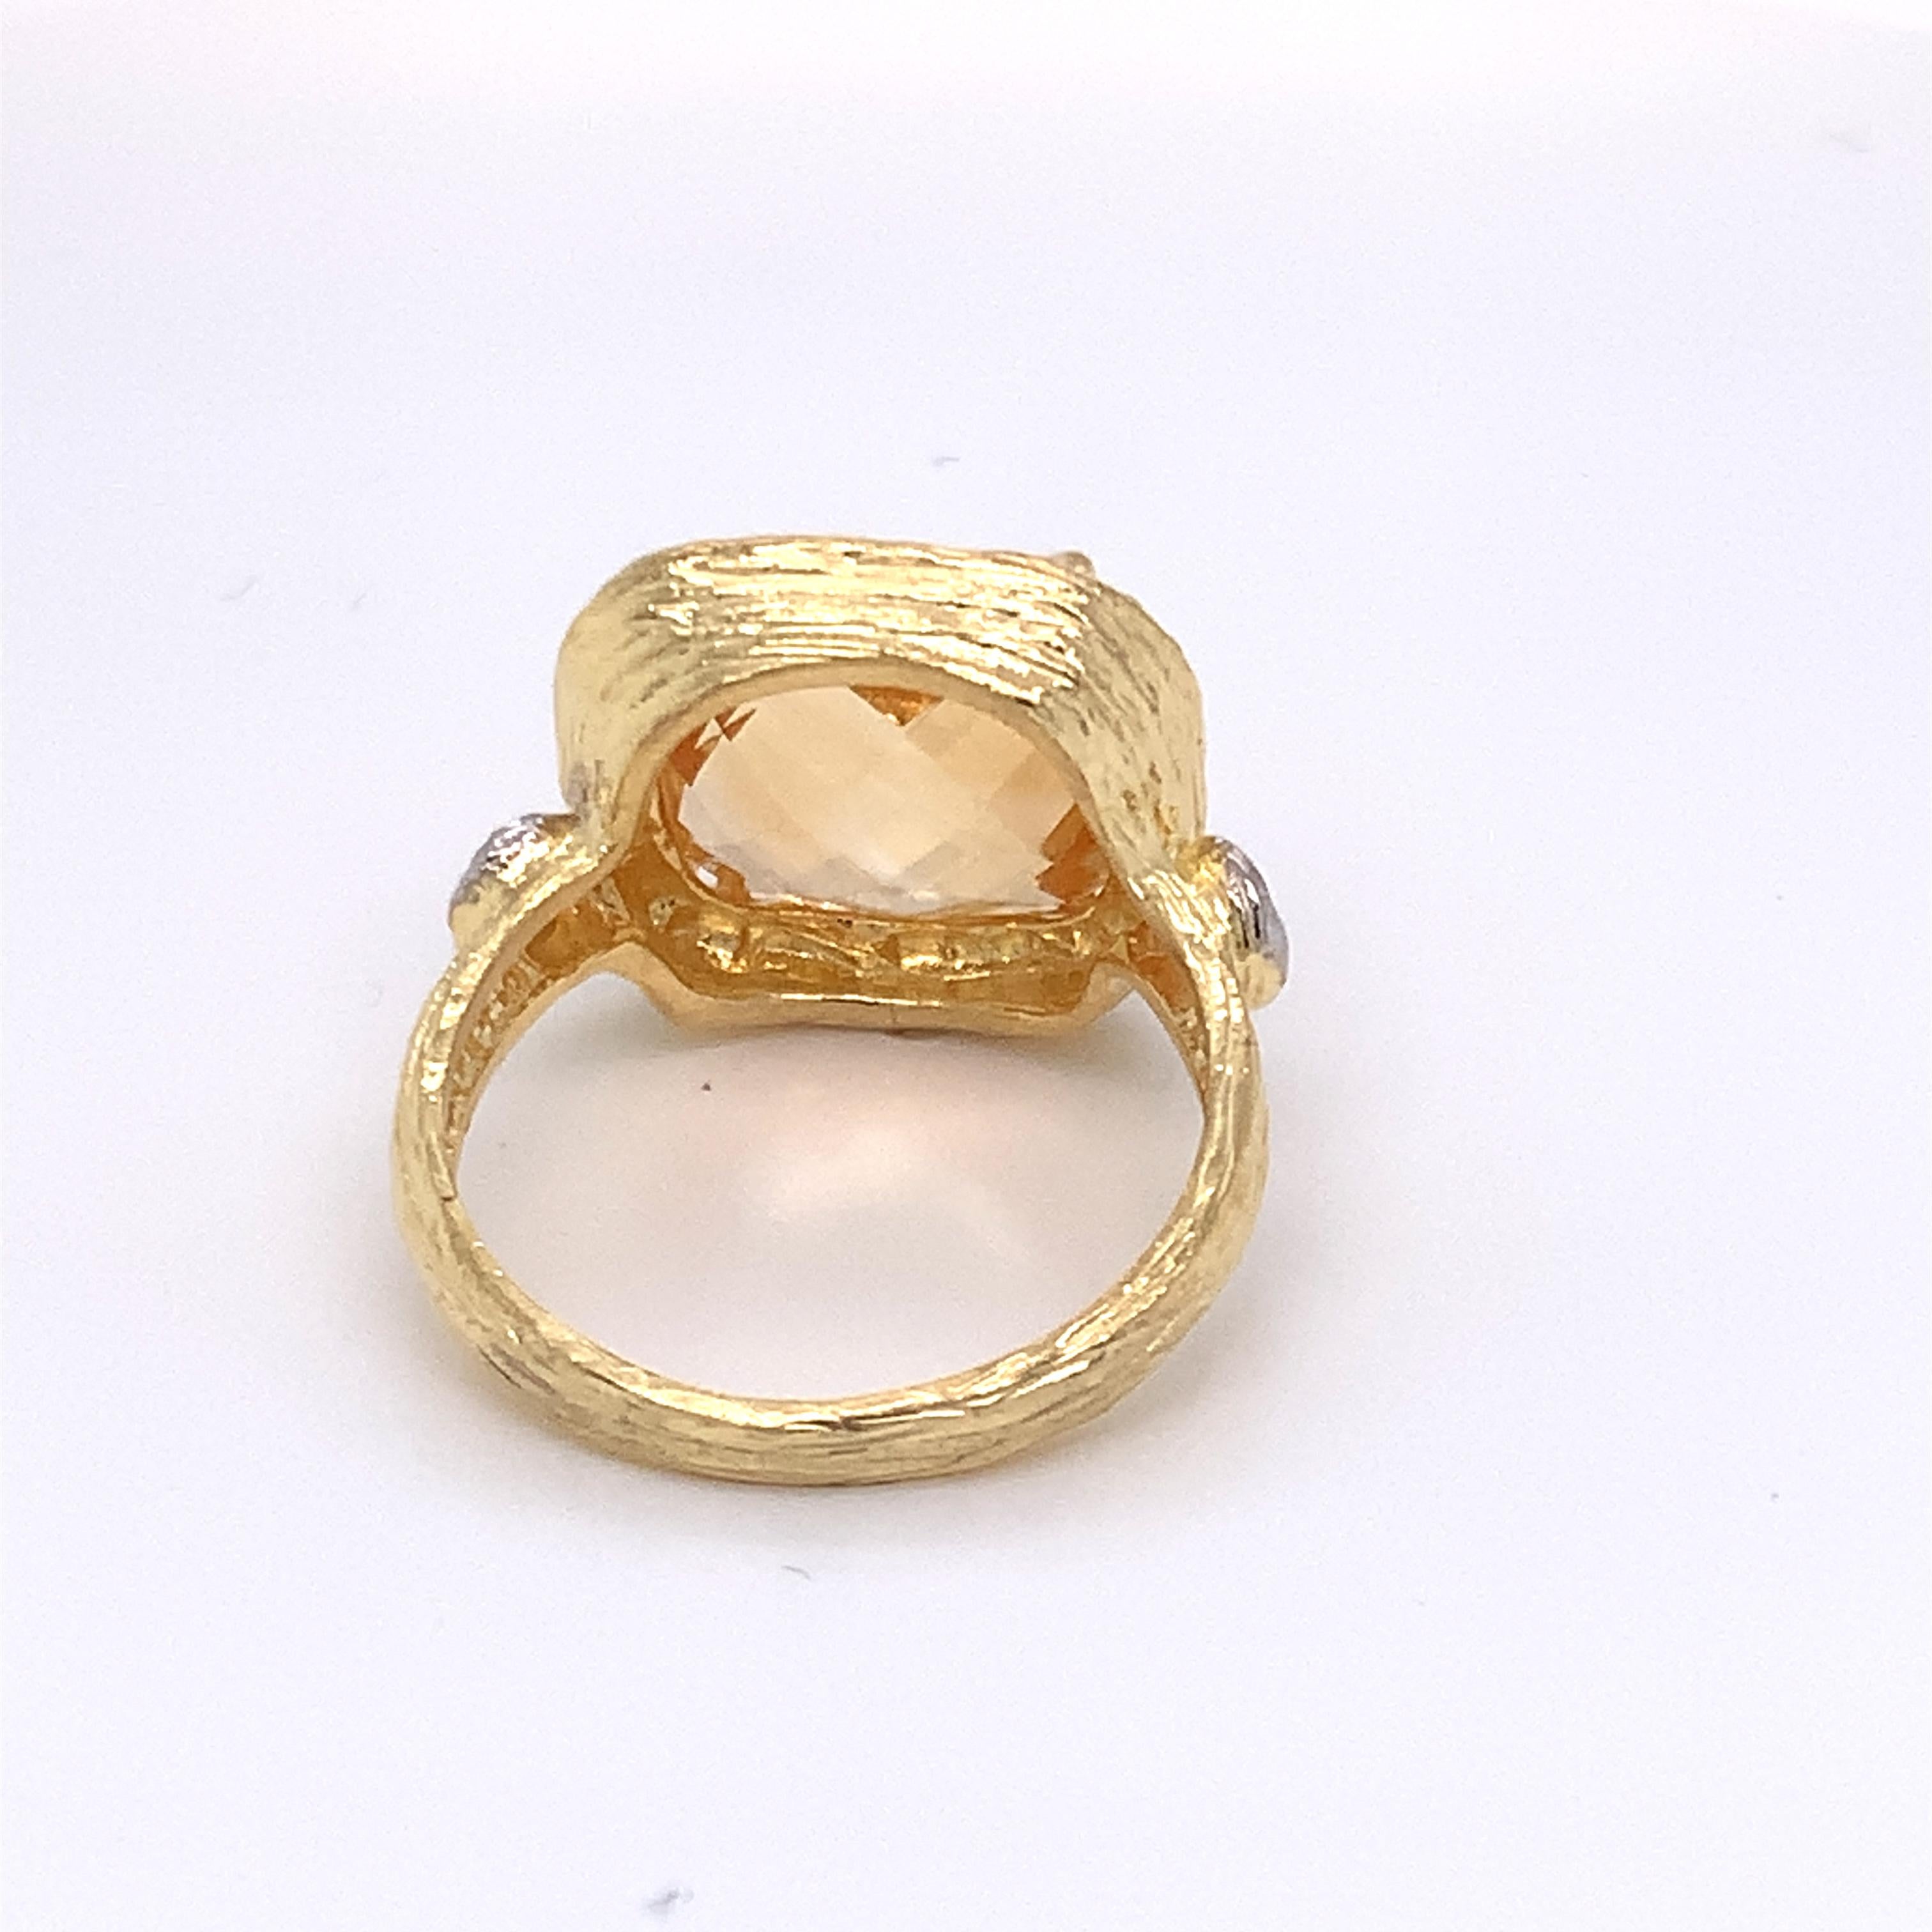 For Sale:  Hand-Crafted 14 Karat Yellow Gold Citrine Color Stone Ring 2